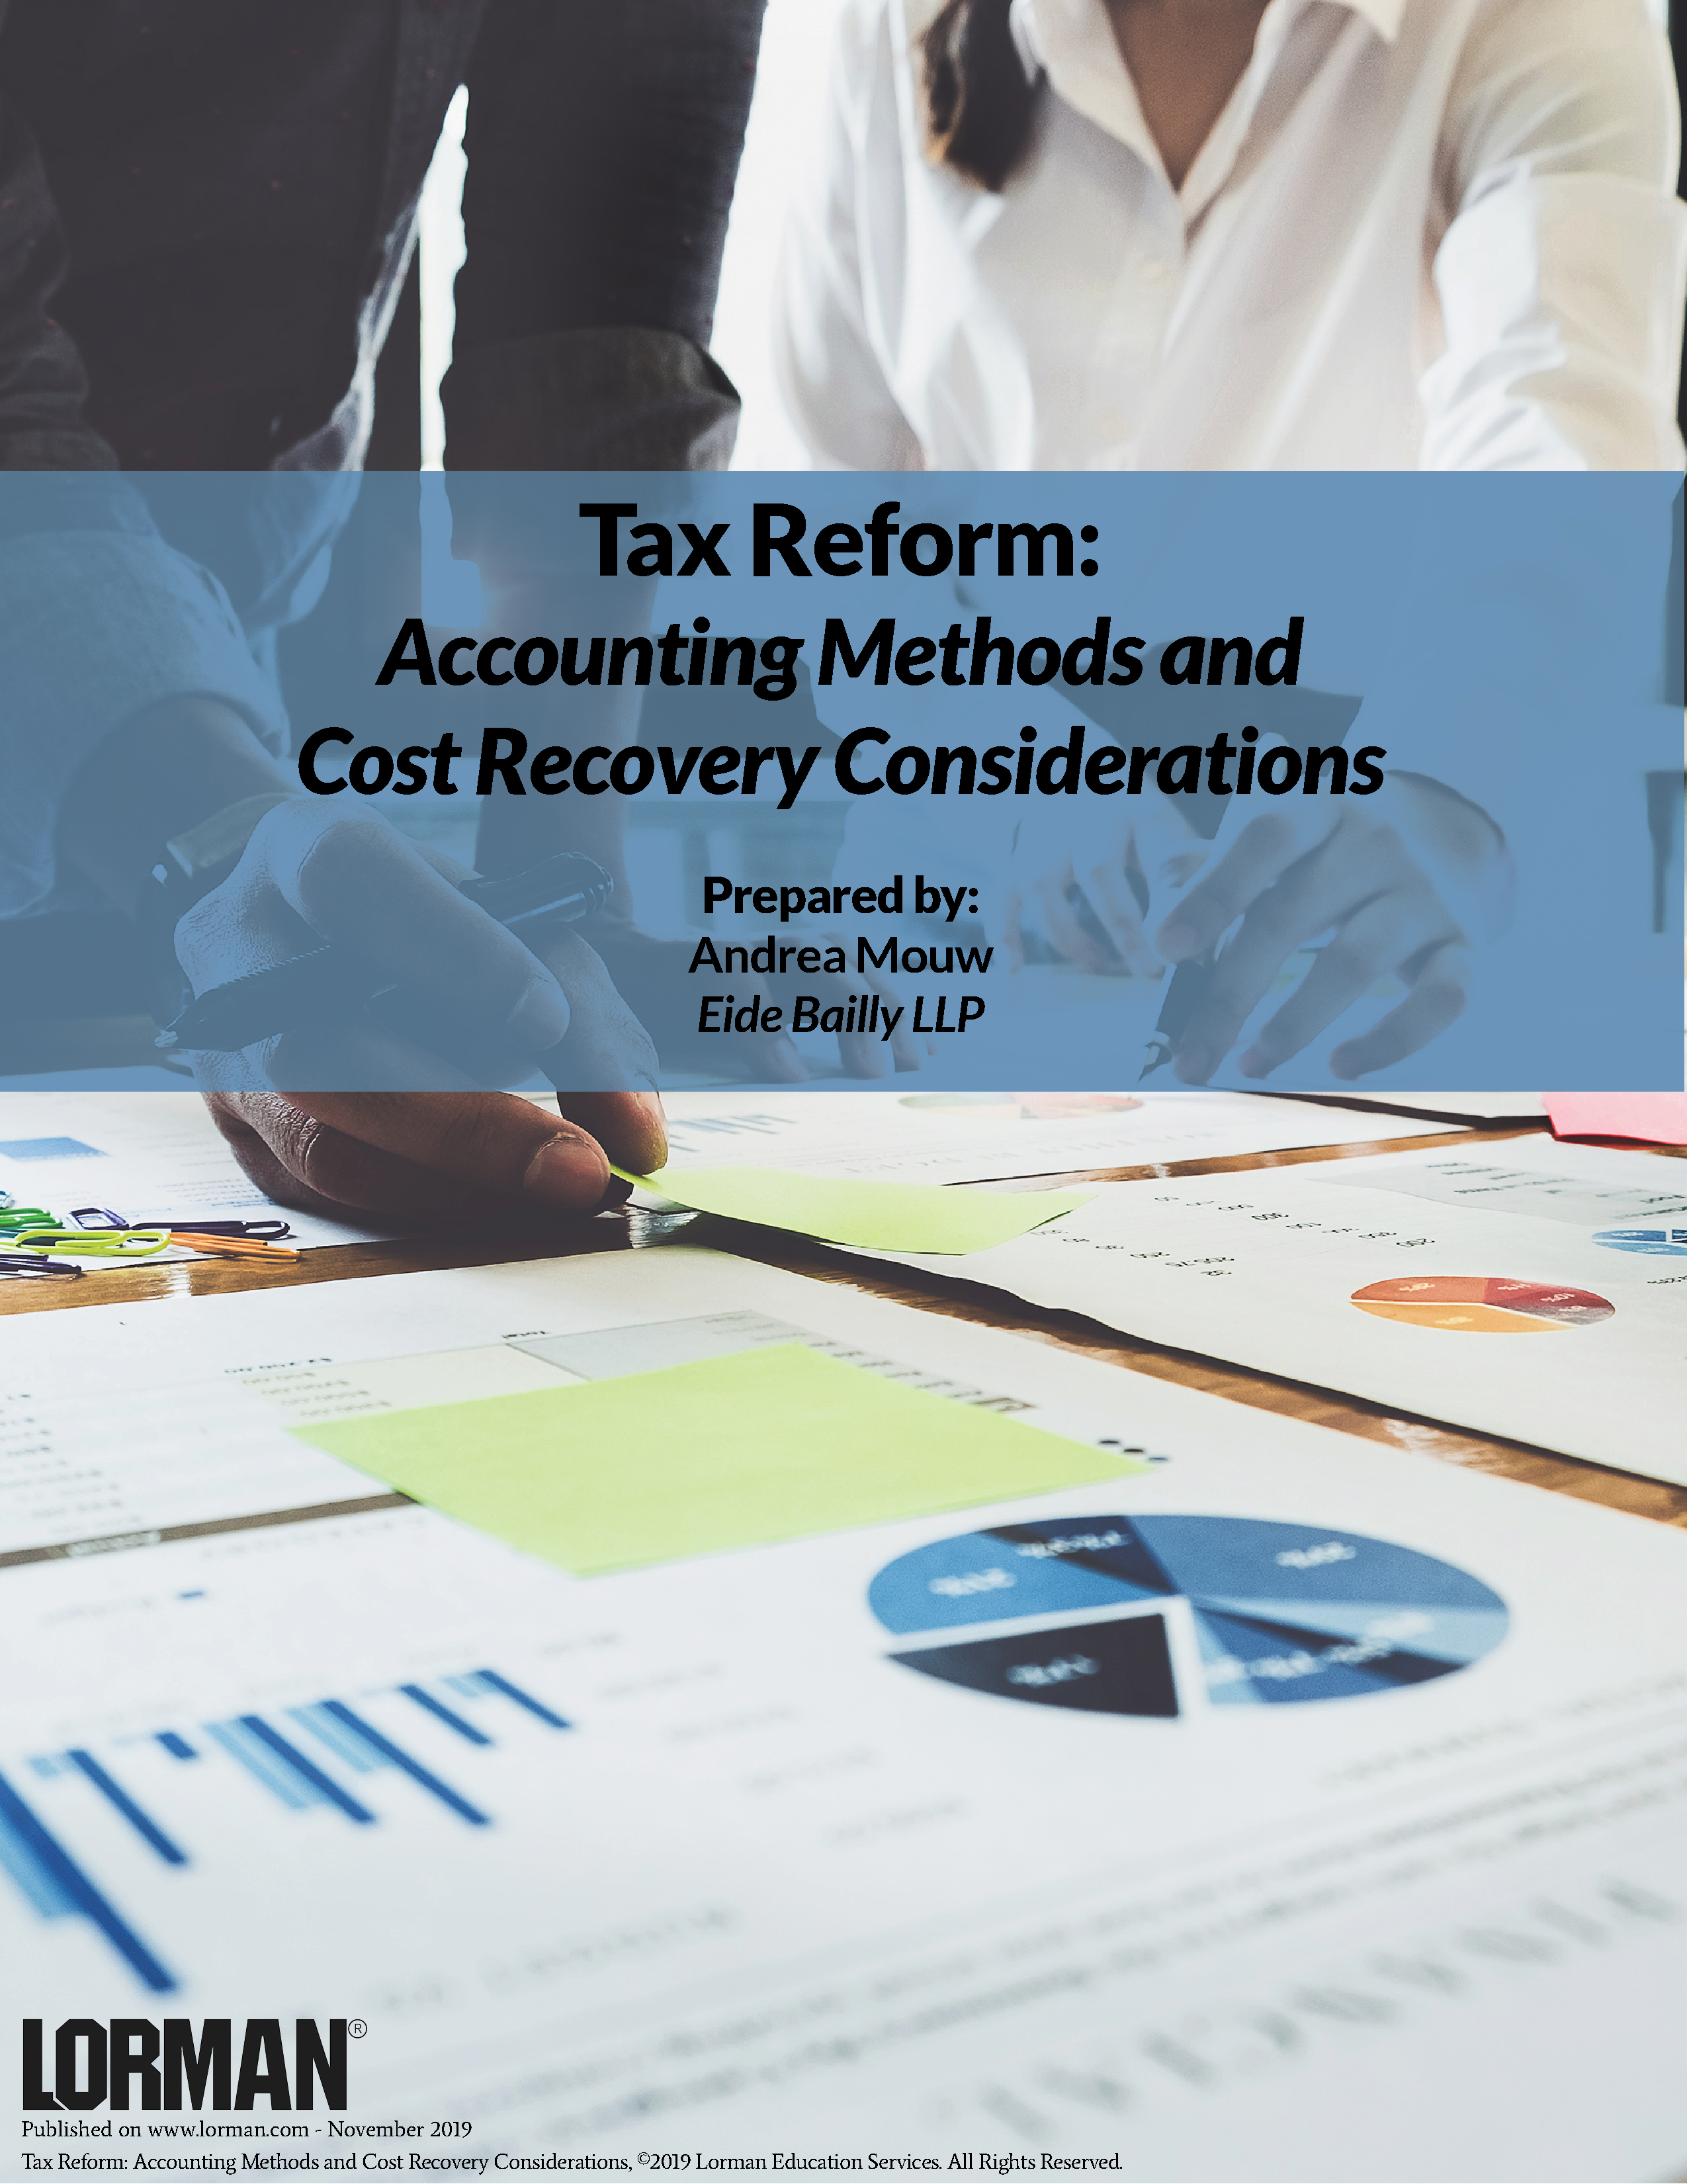 Tax Reform - Accounting Methods and Cost Recovery Considerations